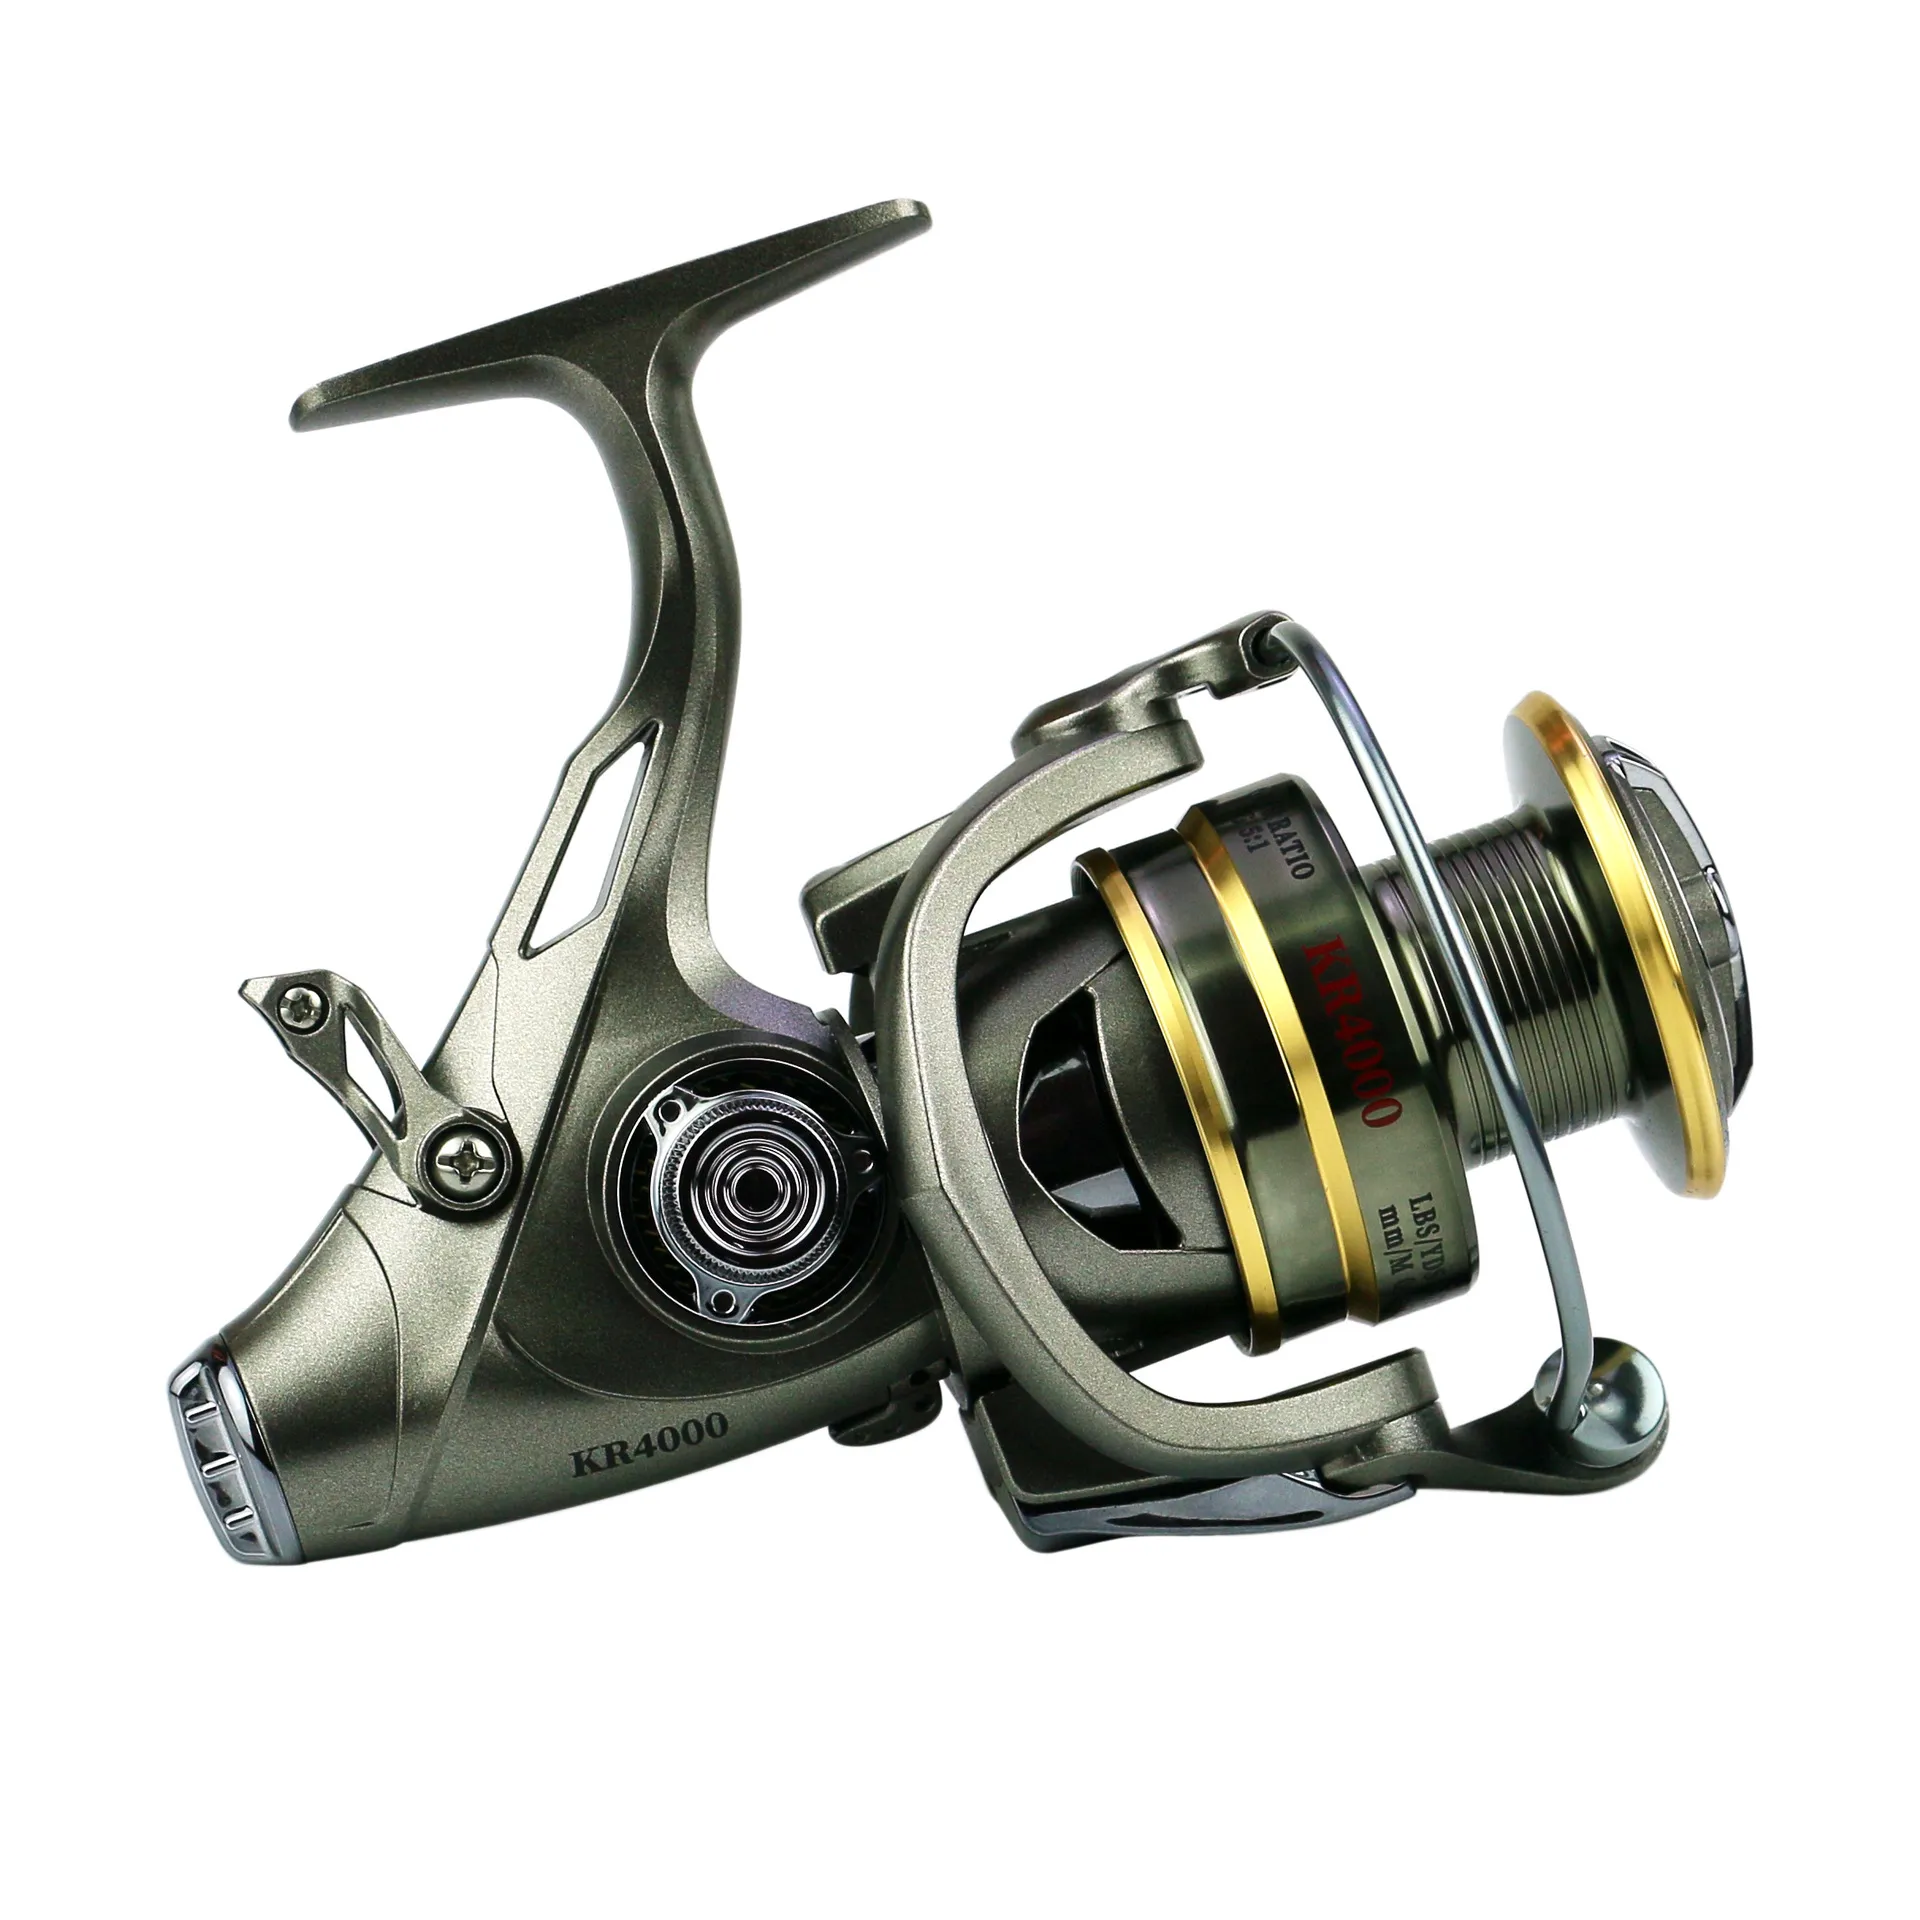 WOEN Library Double Discharge Fishing Top Rated Spinning Reels KR3000/600  5.5:1 Speed Ratio Sea Pole Rod For Effective Throwing From Xieyunen, $13.75